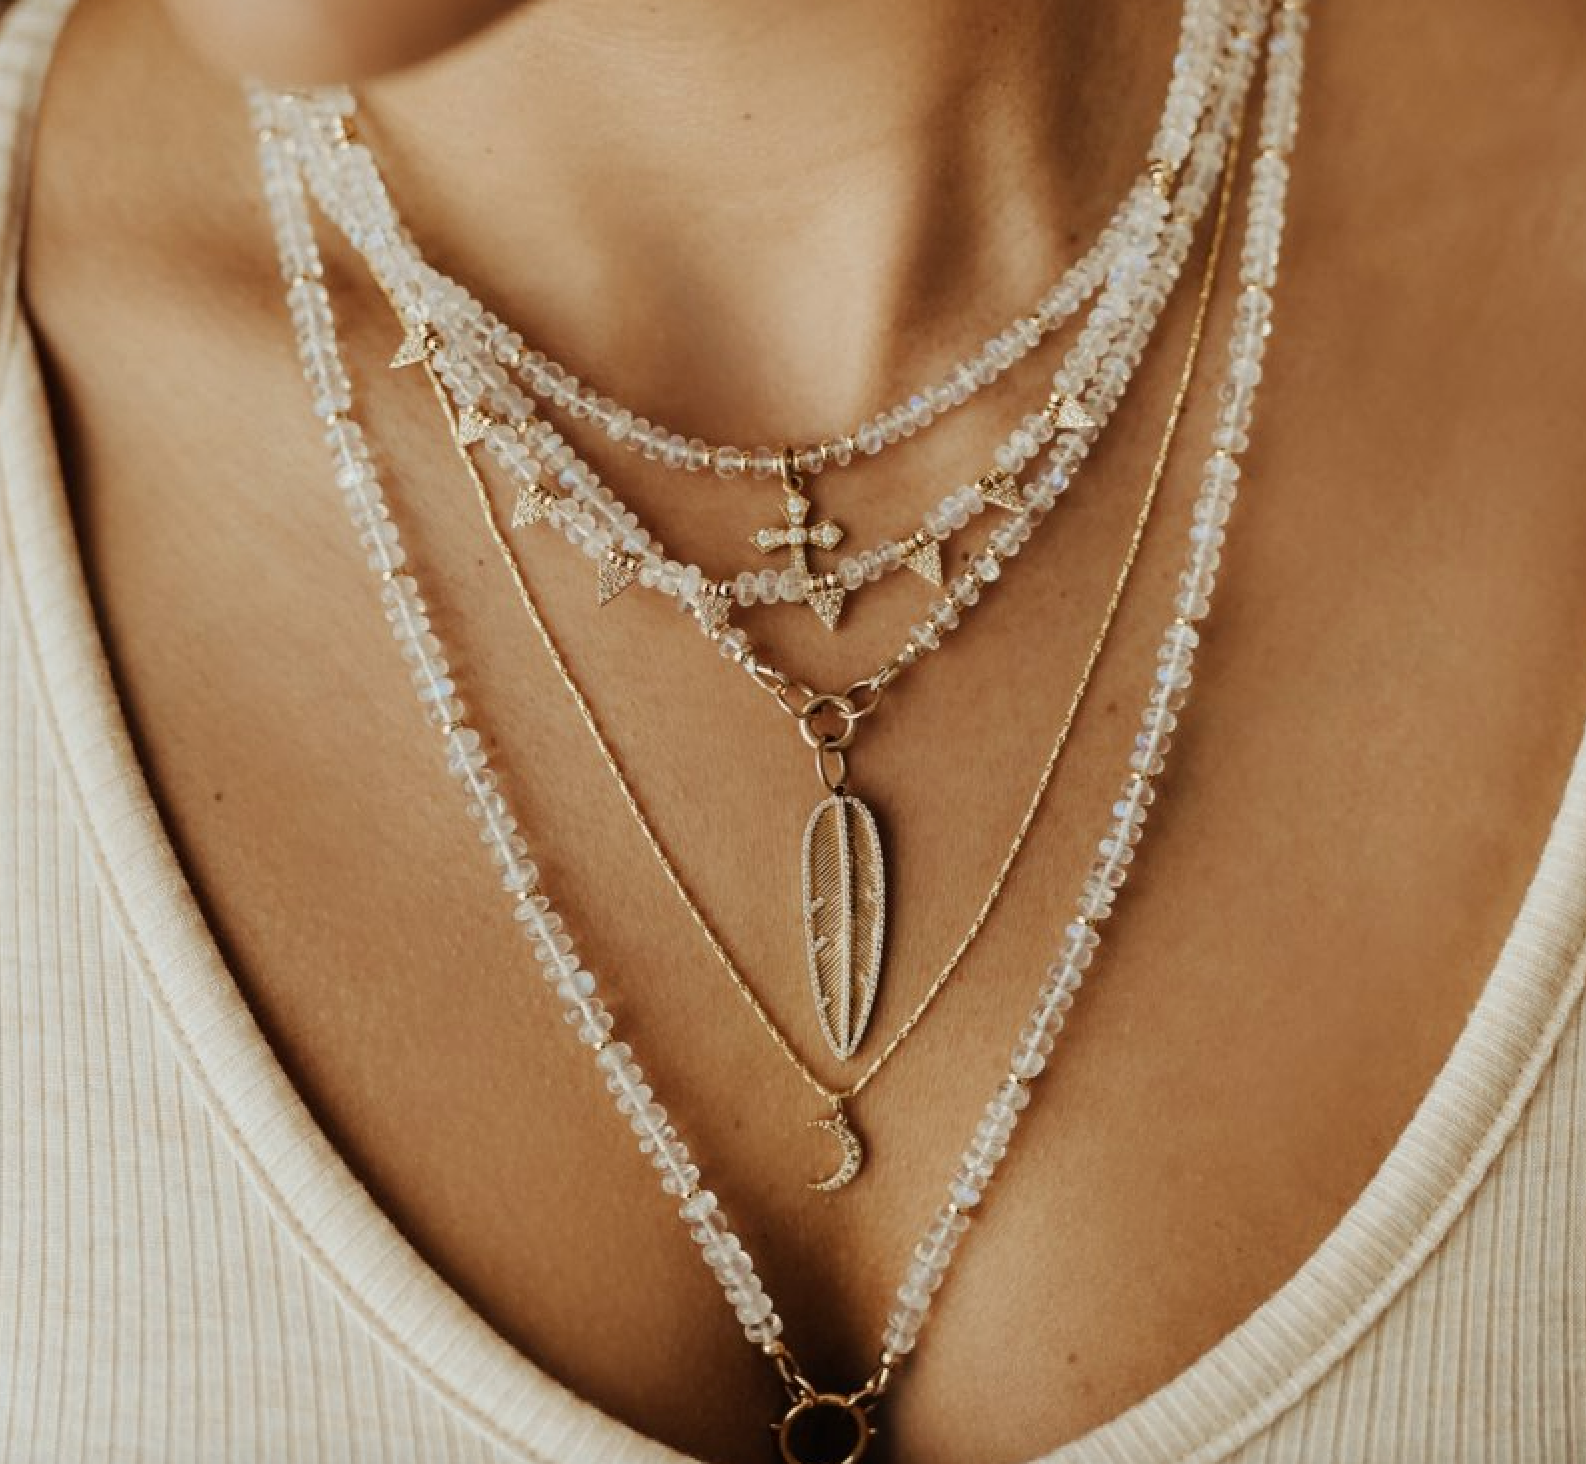 MOONSTONE NECKLACE WITH CHARM HOLDER